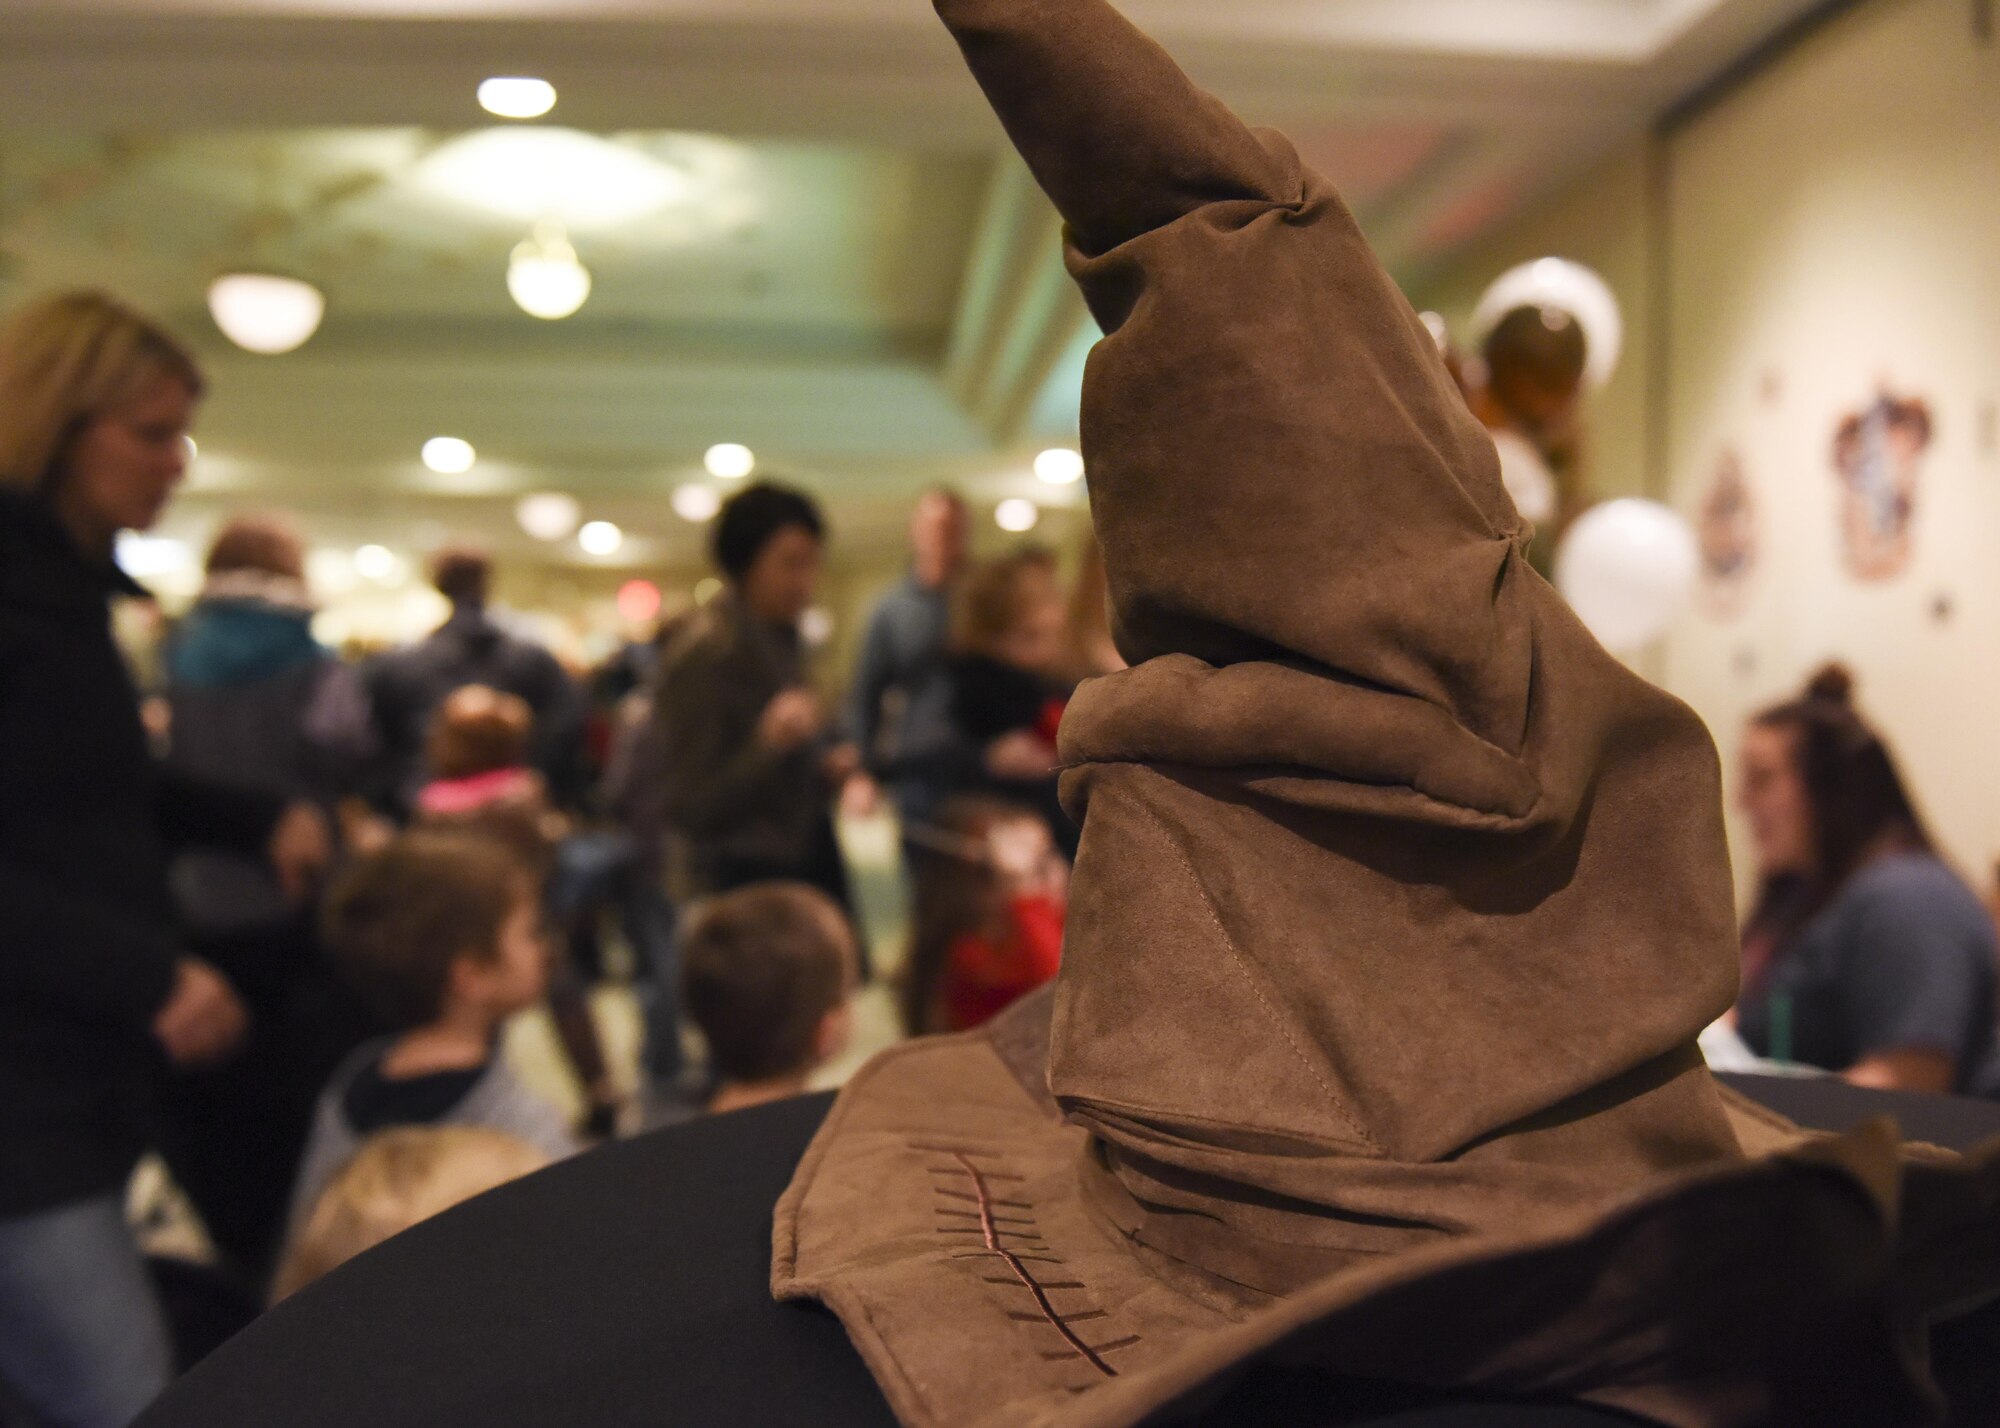 A talking hat used to sort children into their respective wizard houses waits on a table during the annual tree lighting event at Whiteman Air Force Base, Mo., Nov. 29, 2016. Children also had the opportunity to enjoy different aspects of the wizard-themed event, such as choosing a homemade wand and tasting questionable jelly bean flavors.